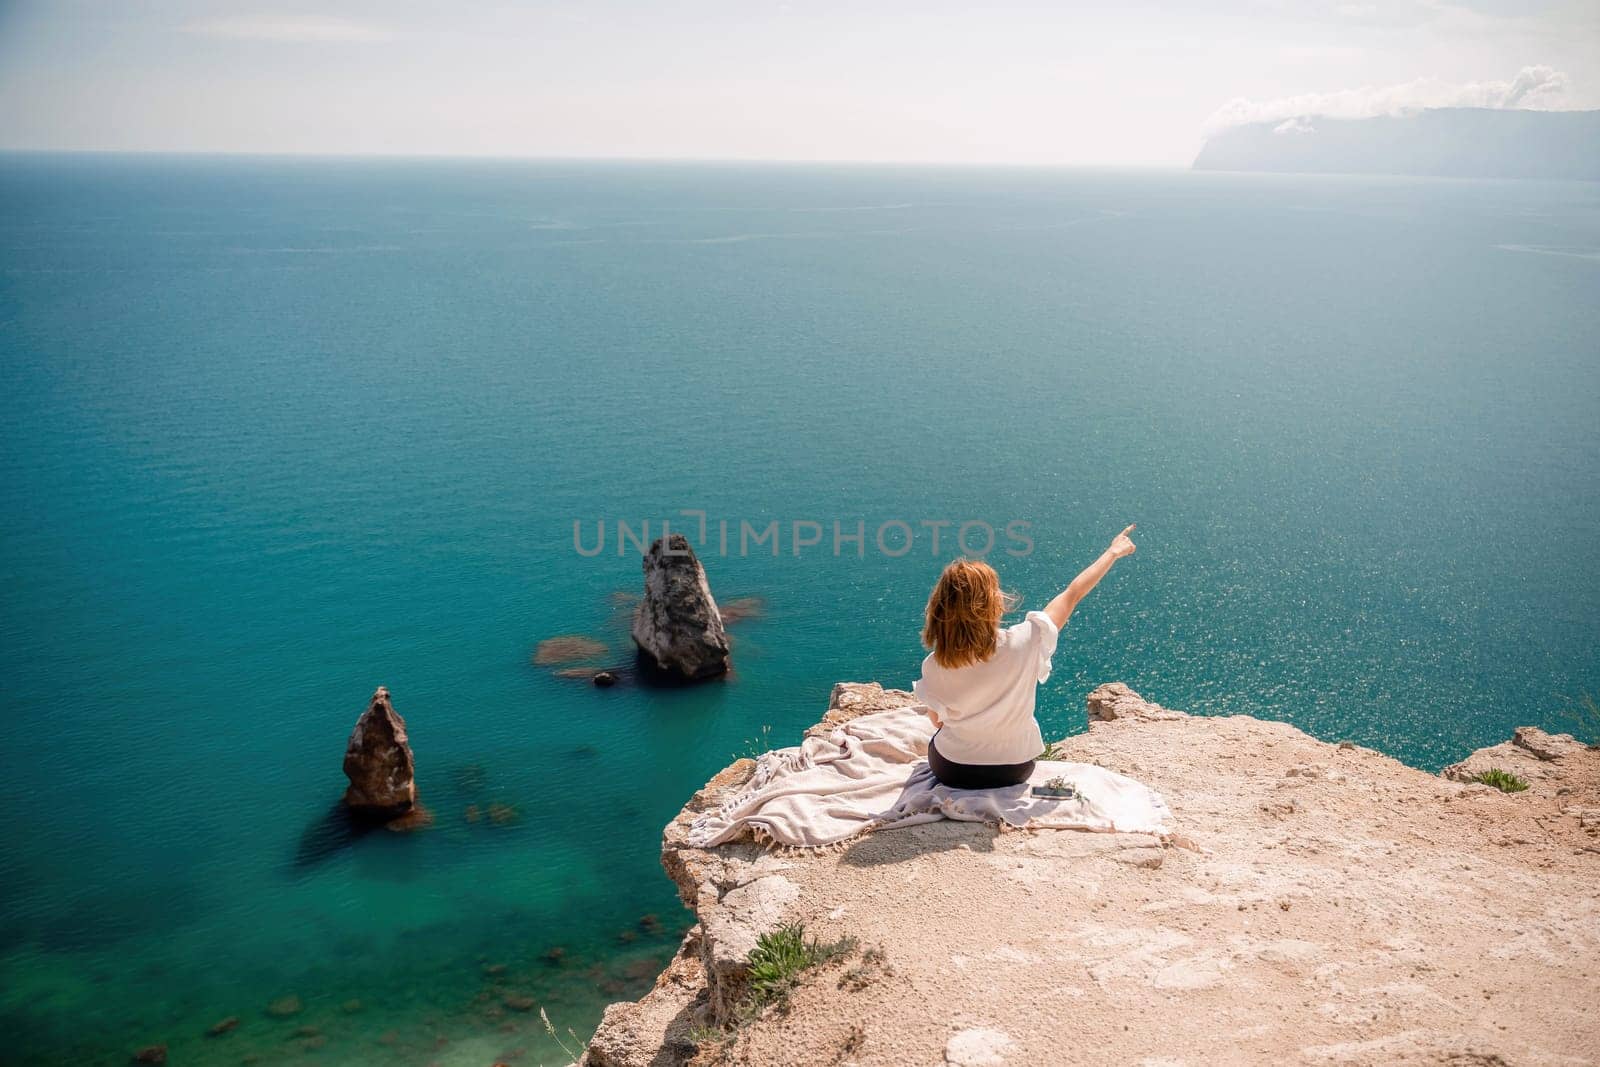 A woman is sitting on a rock overlooking the ocean. She is pointing to the water. The scene is peaceful and serene, with the woman enjoying the view and the calming sound of the waves. by Matiunina